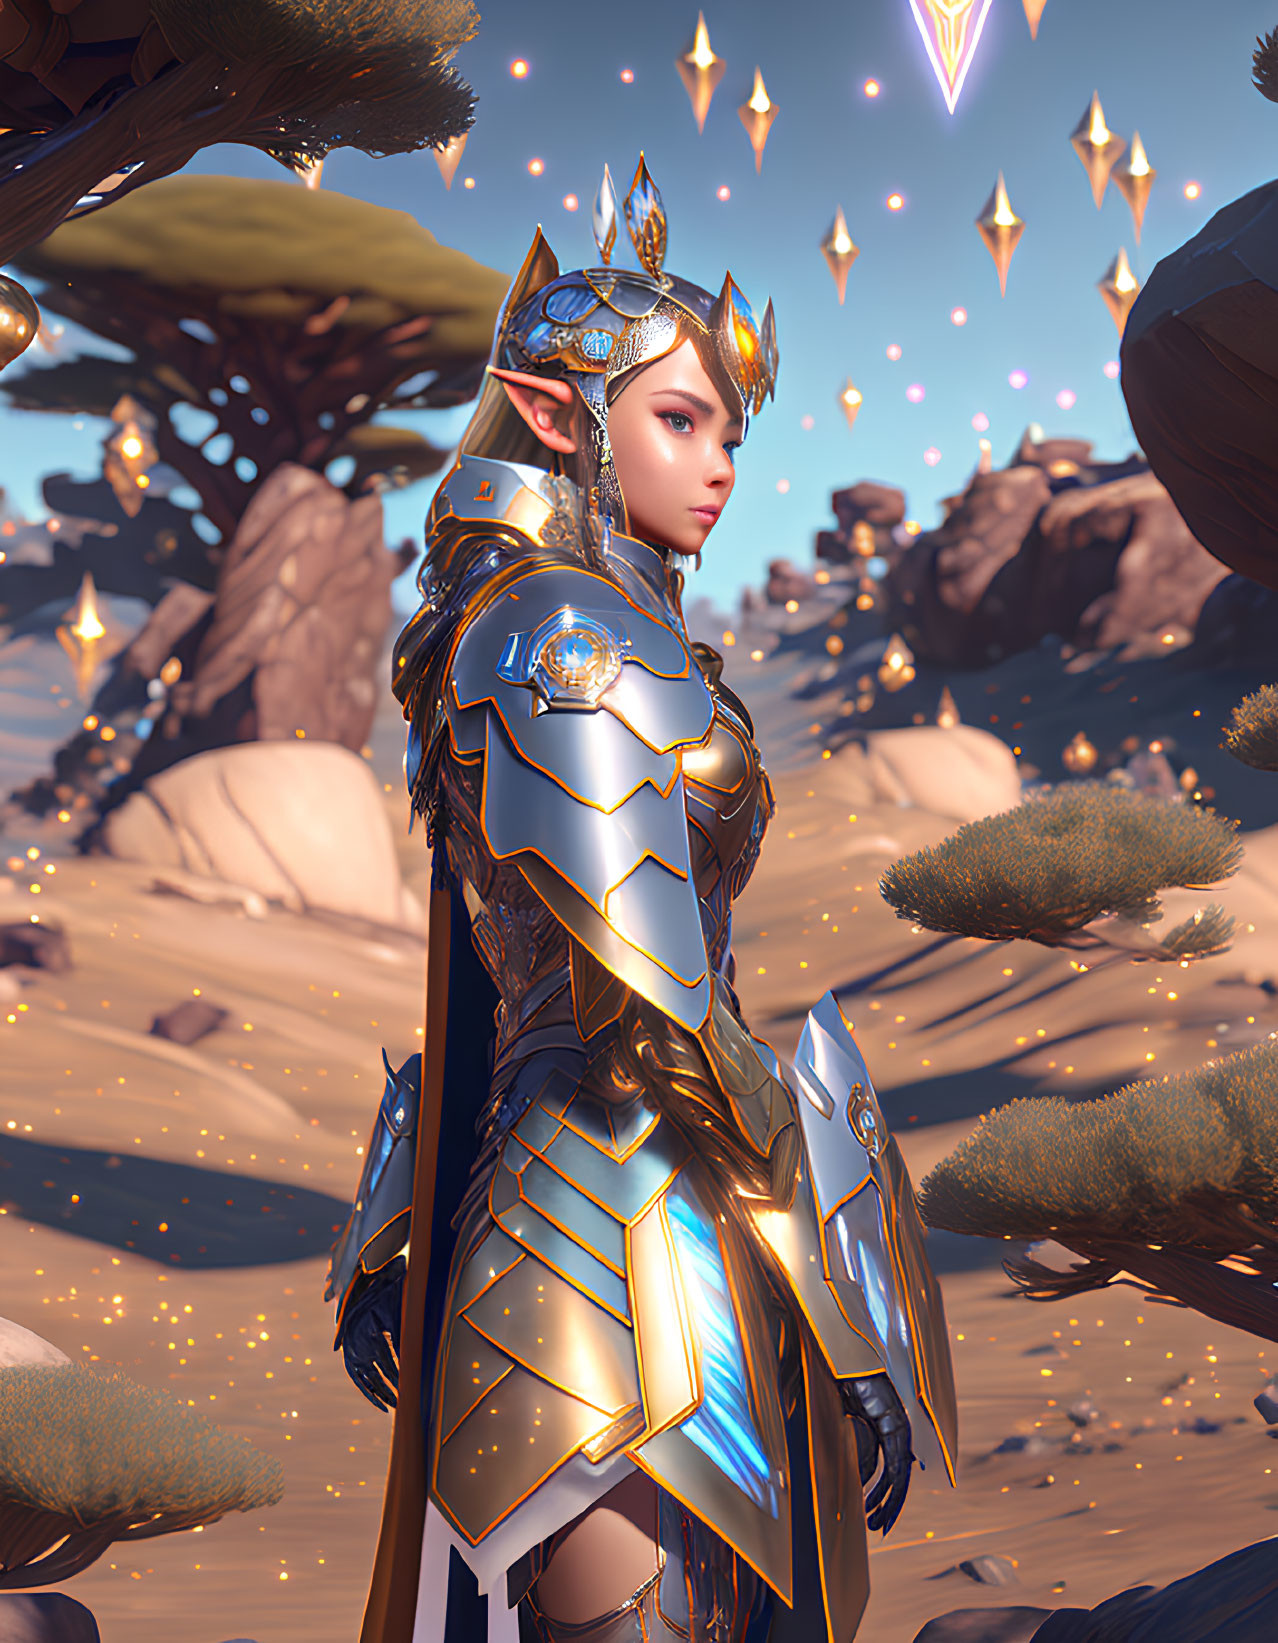 Golden-armored warrior in desert with crystals and vegetation.